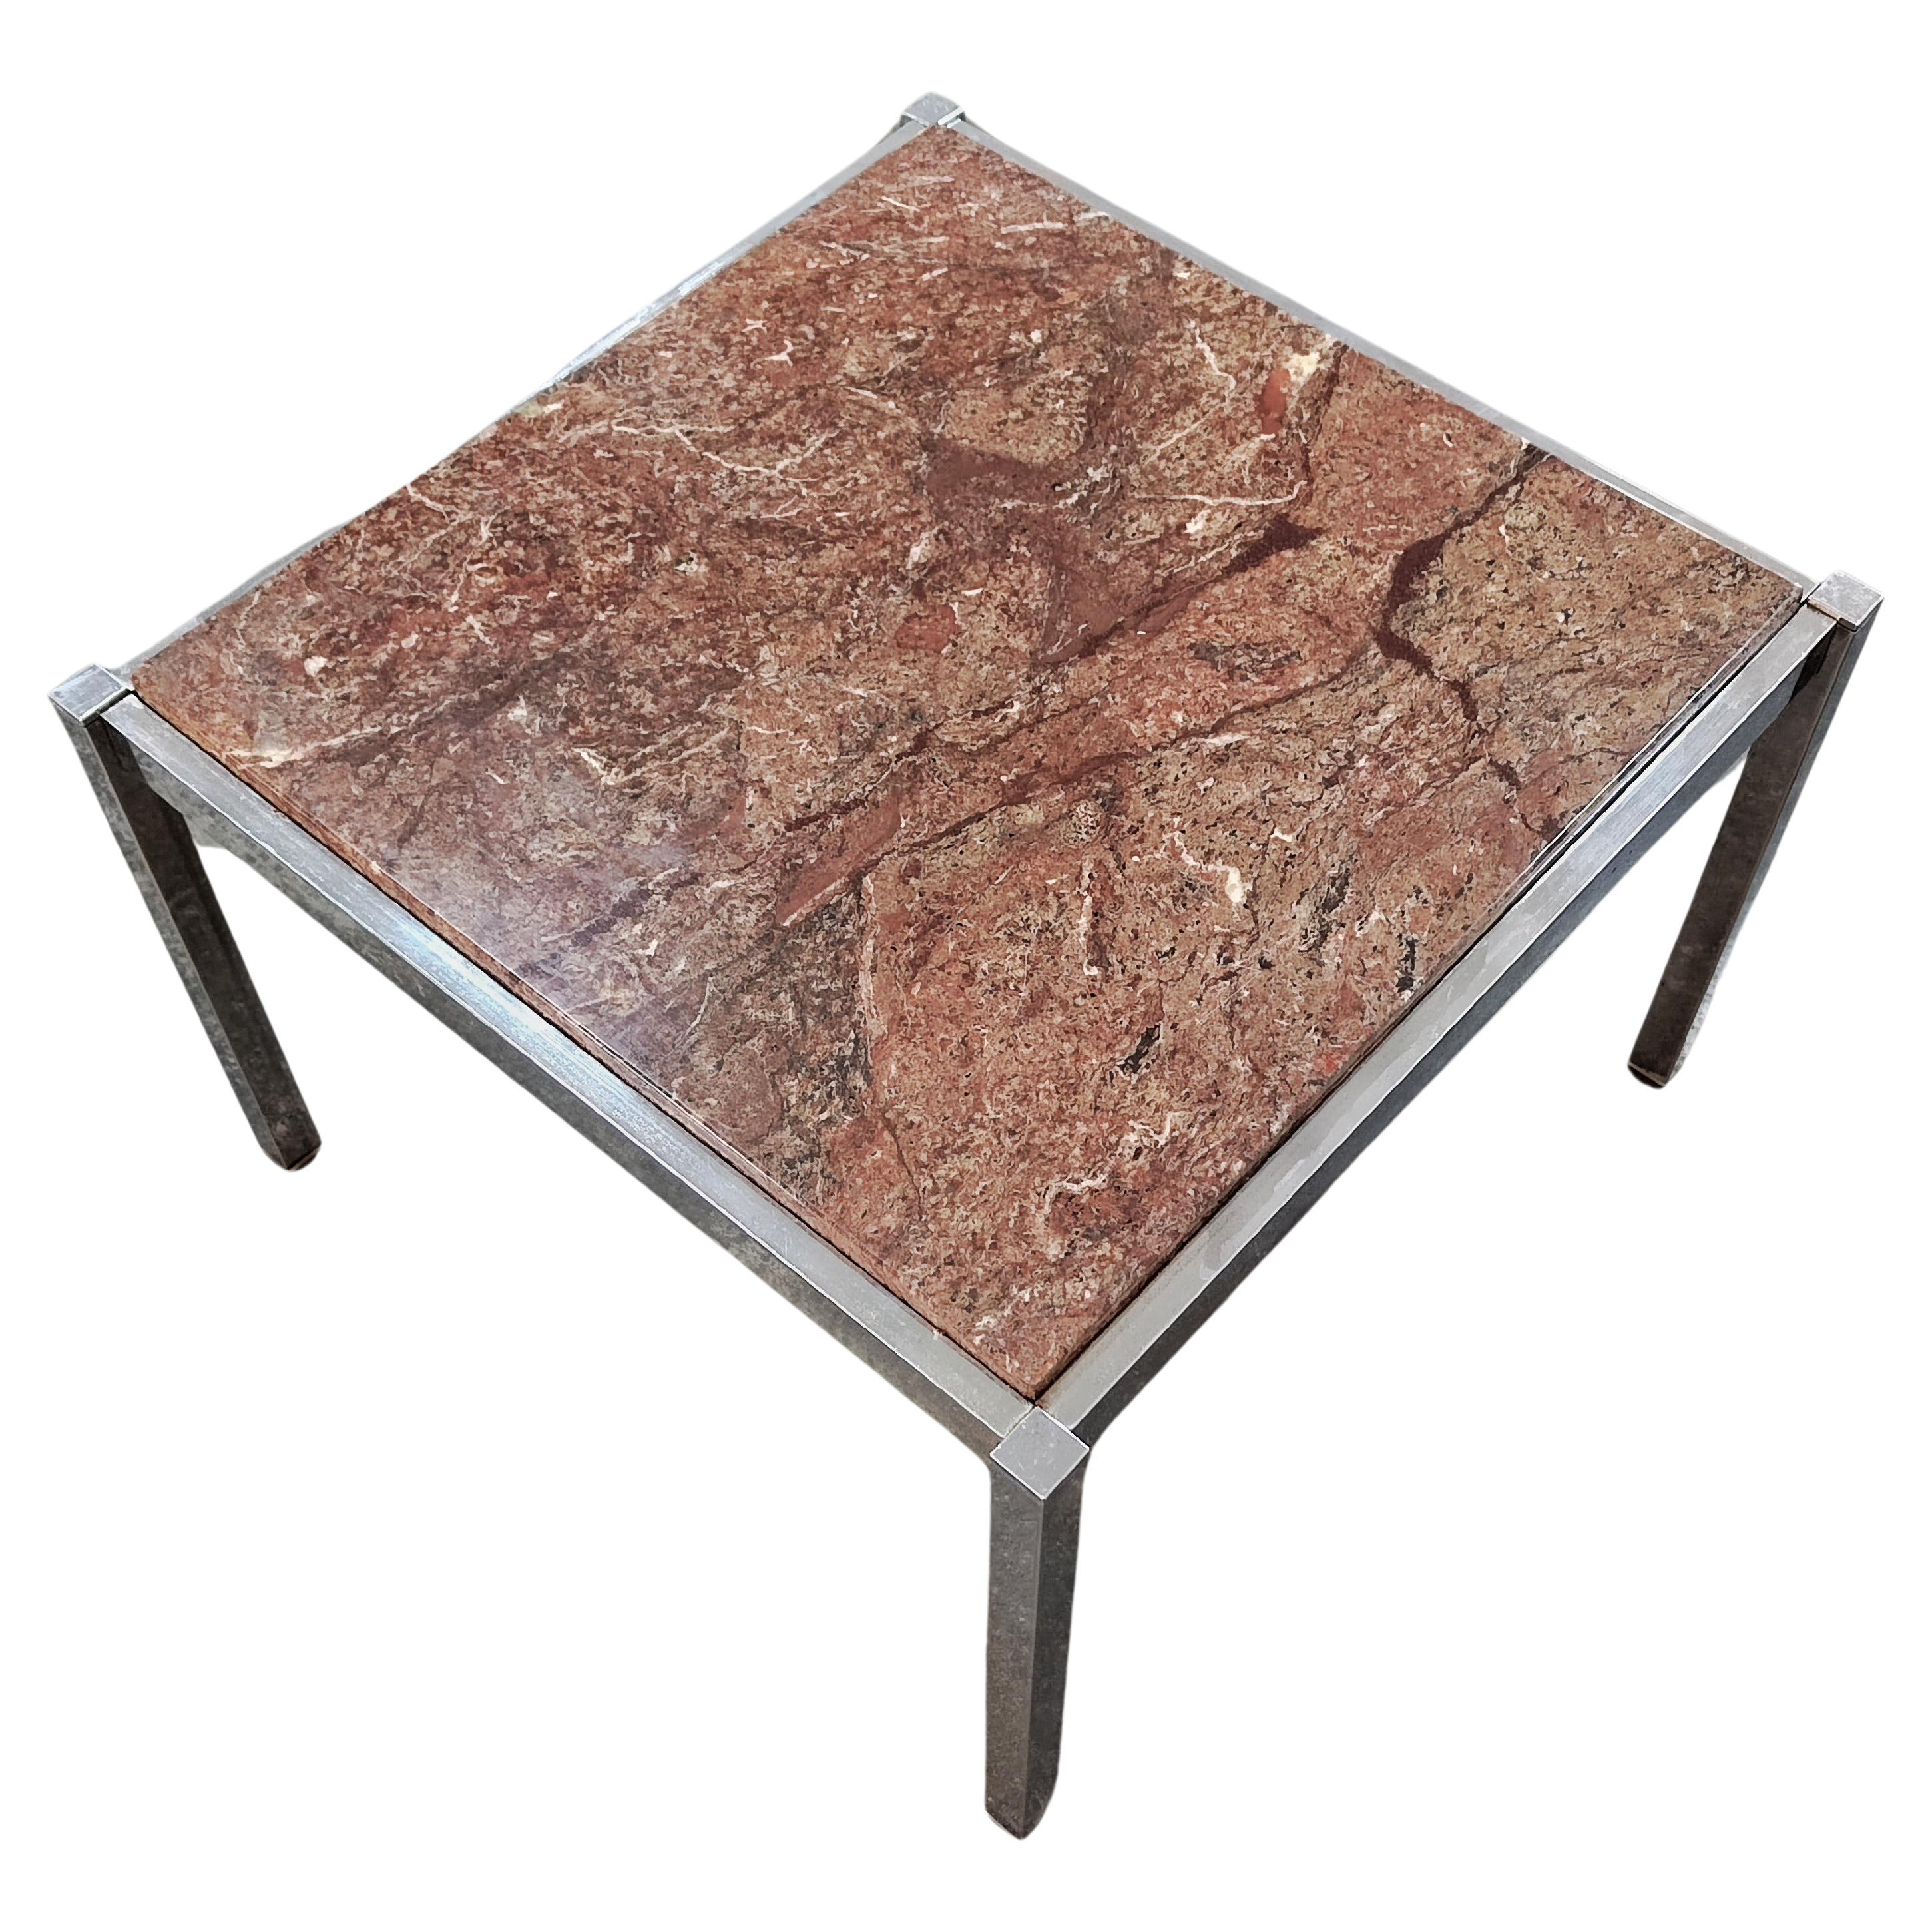 Chrome and Persa Granite Coffee Table, Florence Knoll Style, Italy 1970s